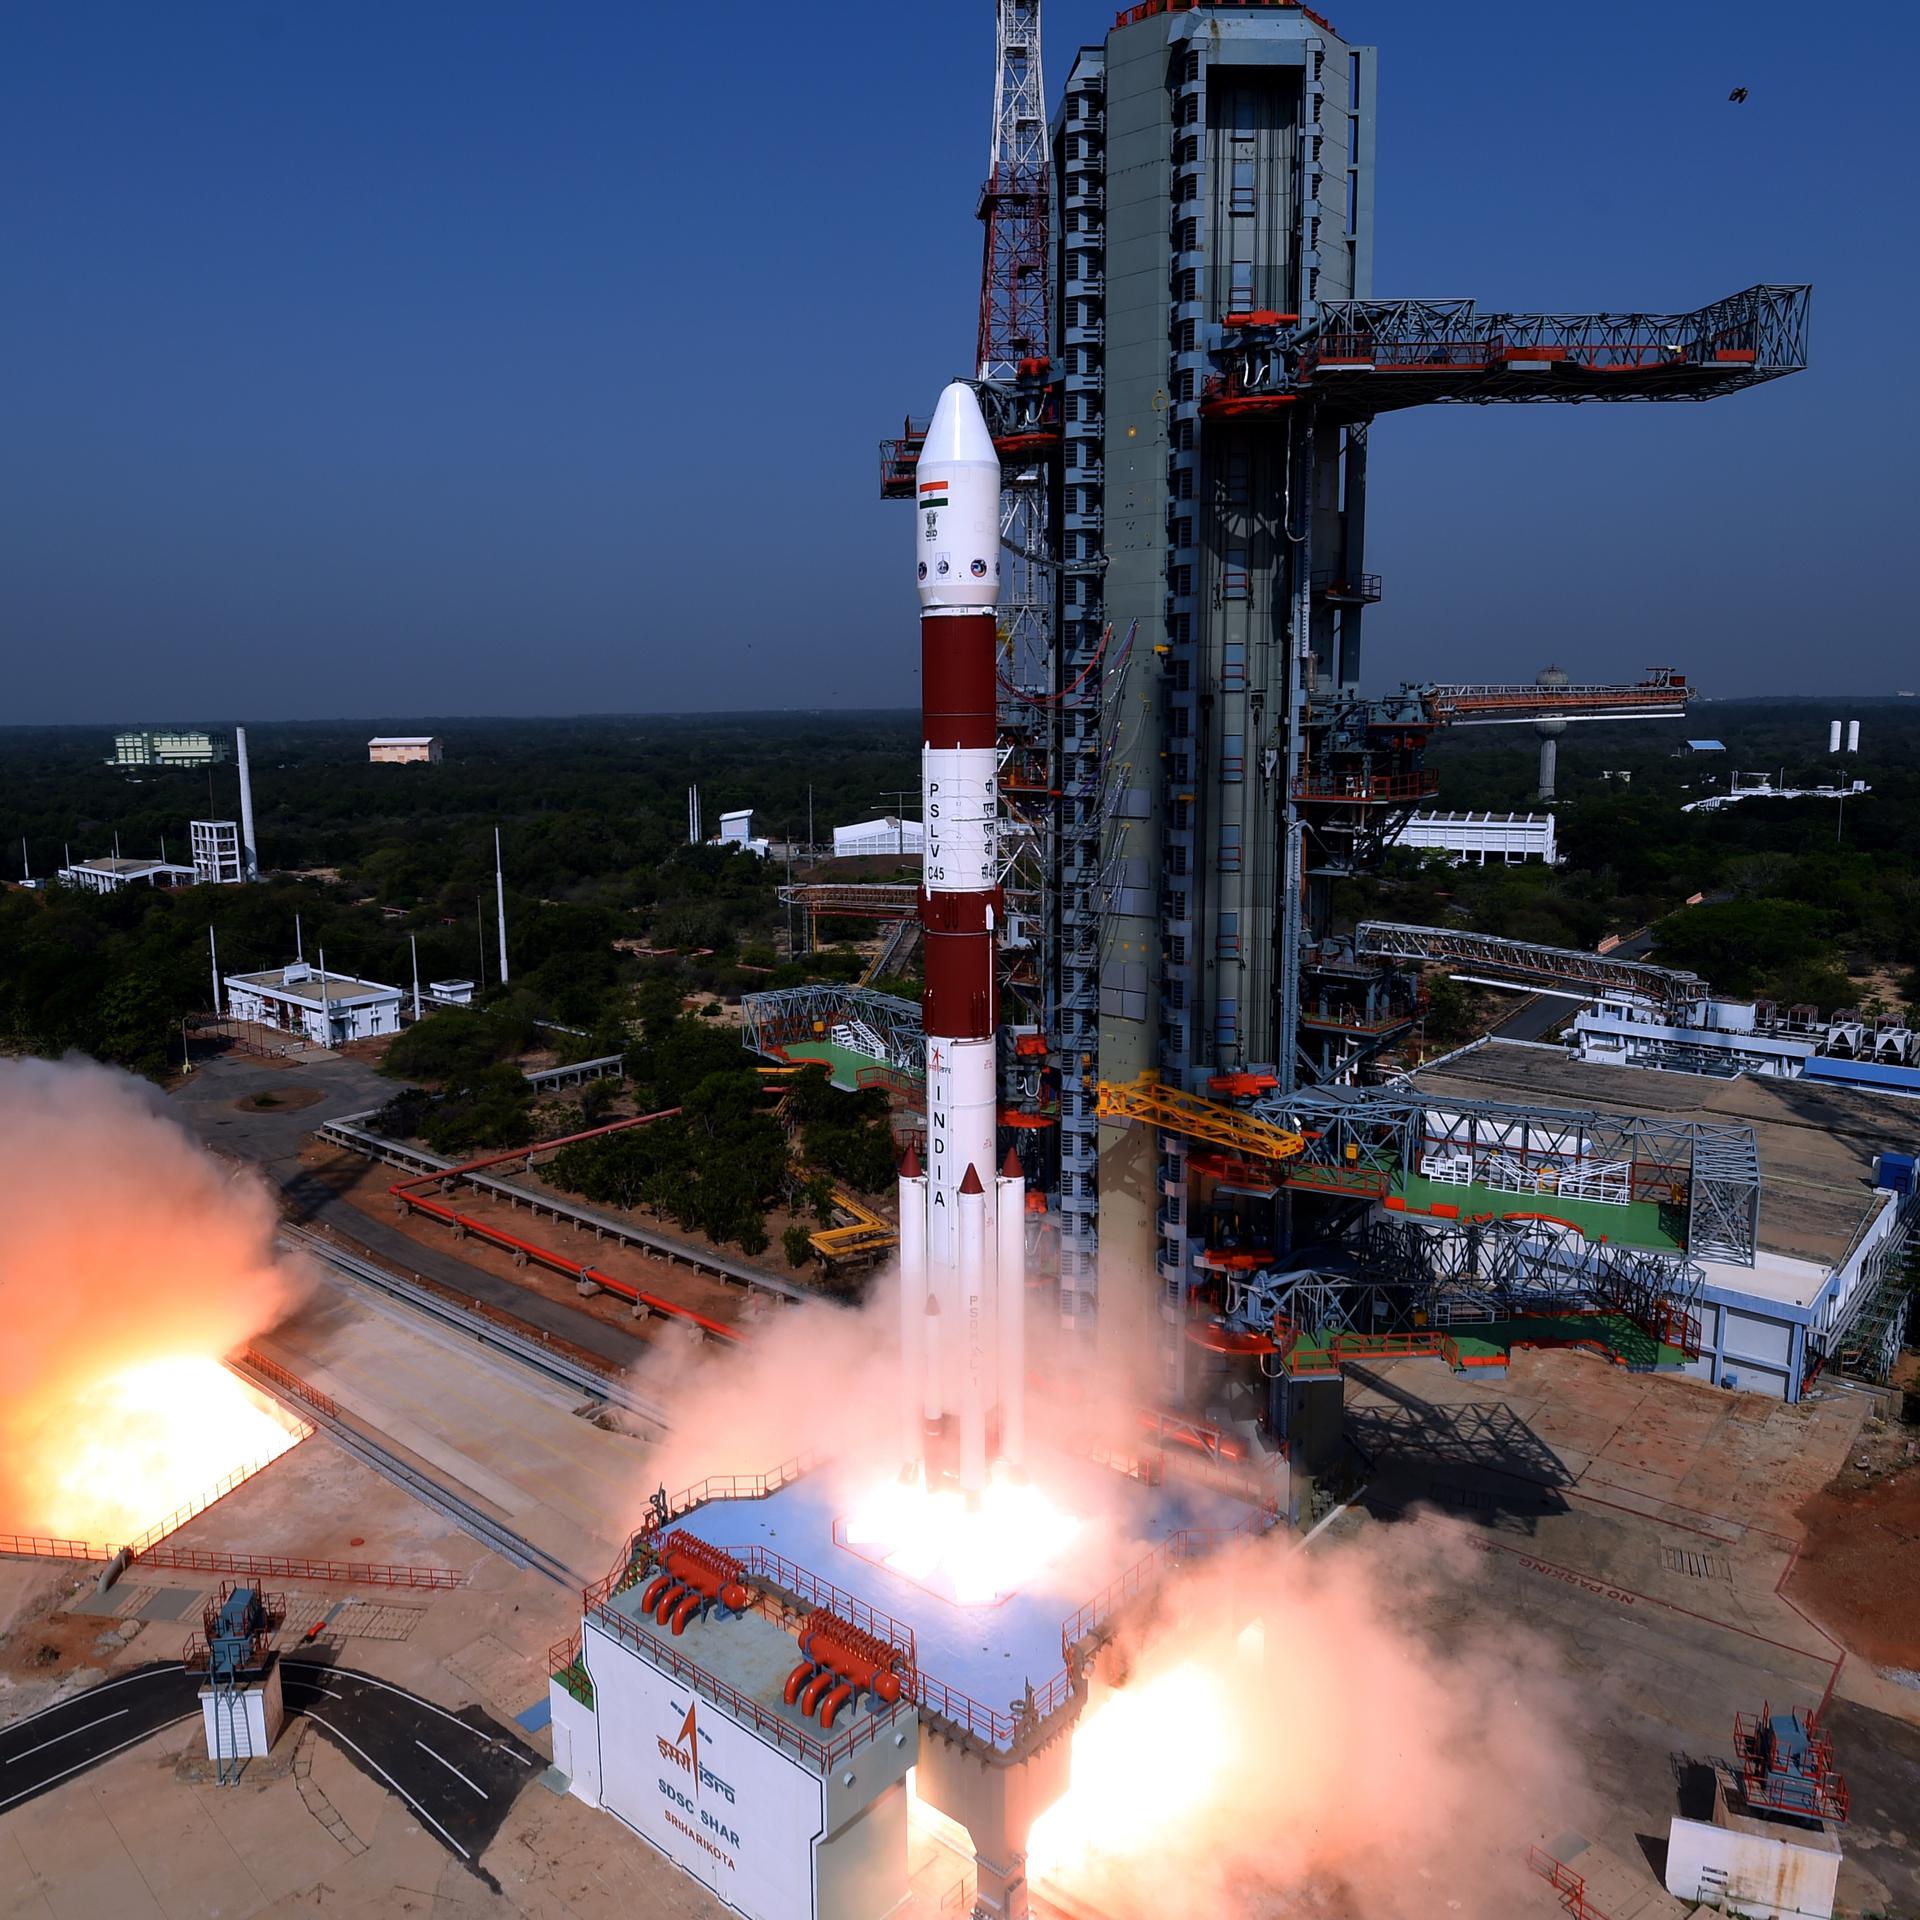  Upcoming rocket launch image PSLV  | EOS-4 (RISAT-1A)